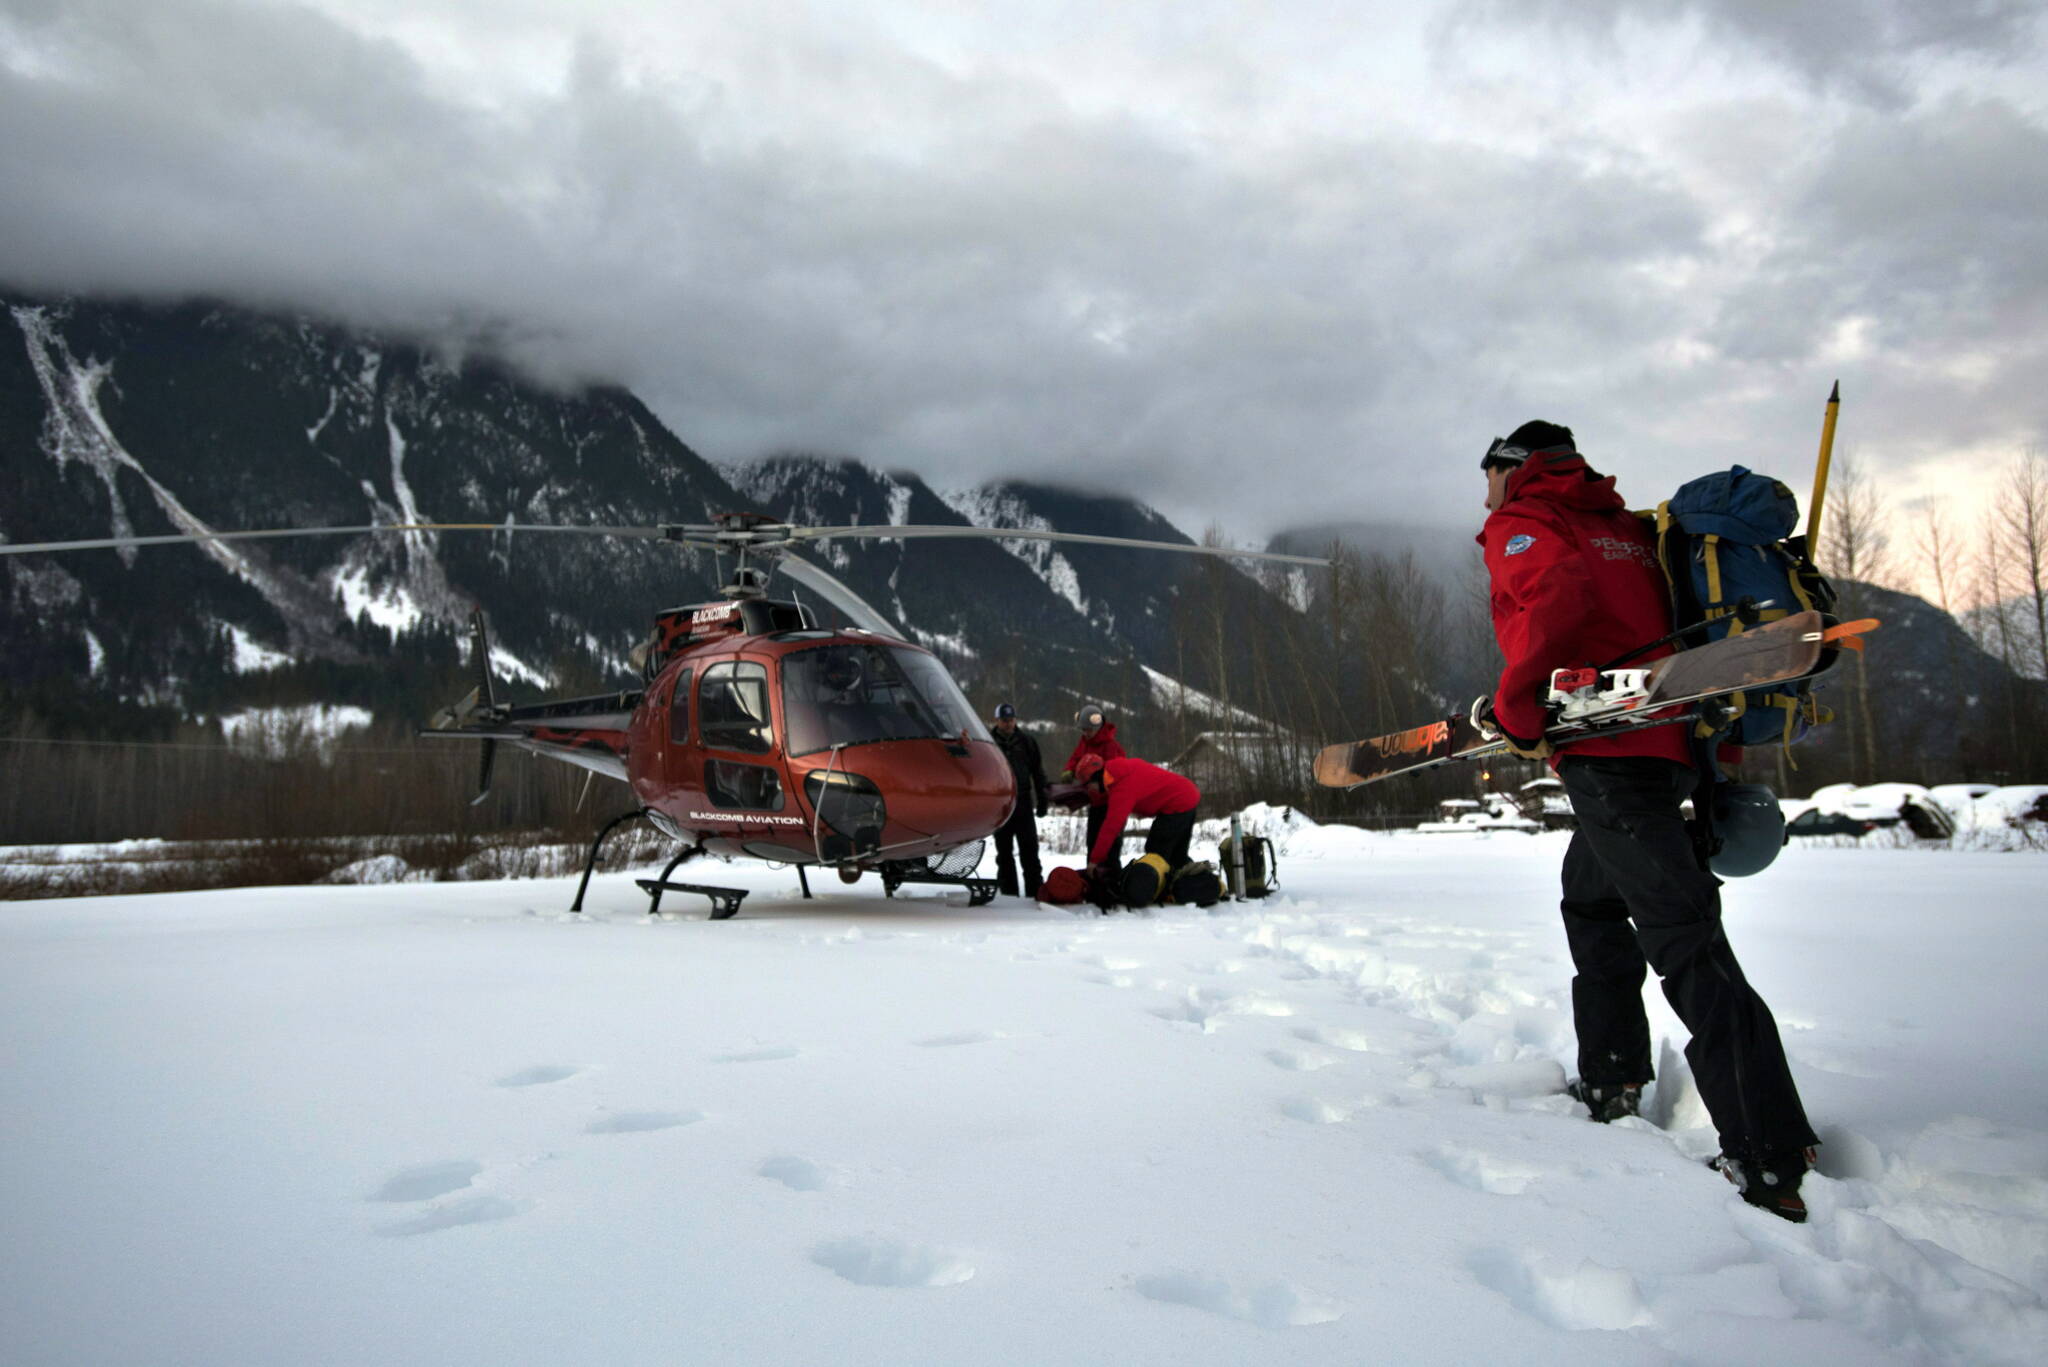 Six skiers have been rescued in two separate operations in the mountains in southwestern British Columbia. Rescue crew members board a helicopter in Pemberton, B.C. in a Monday, Jan.12, 2015 file photo. THE CANADIAN PRESS/Dave Steers